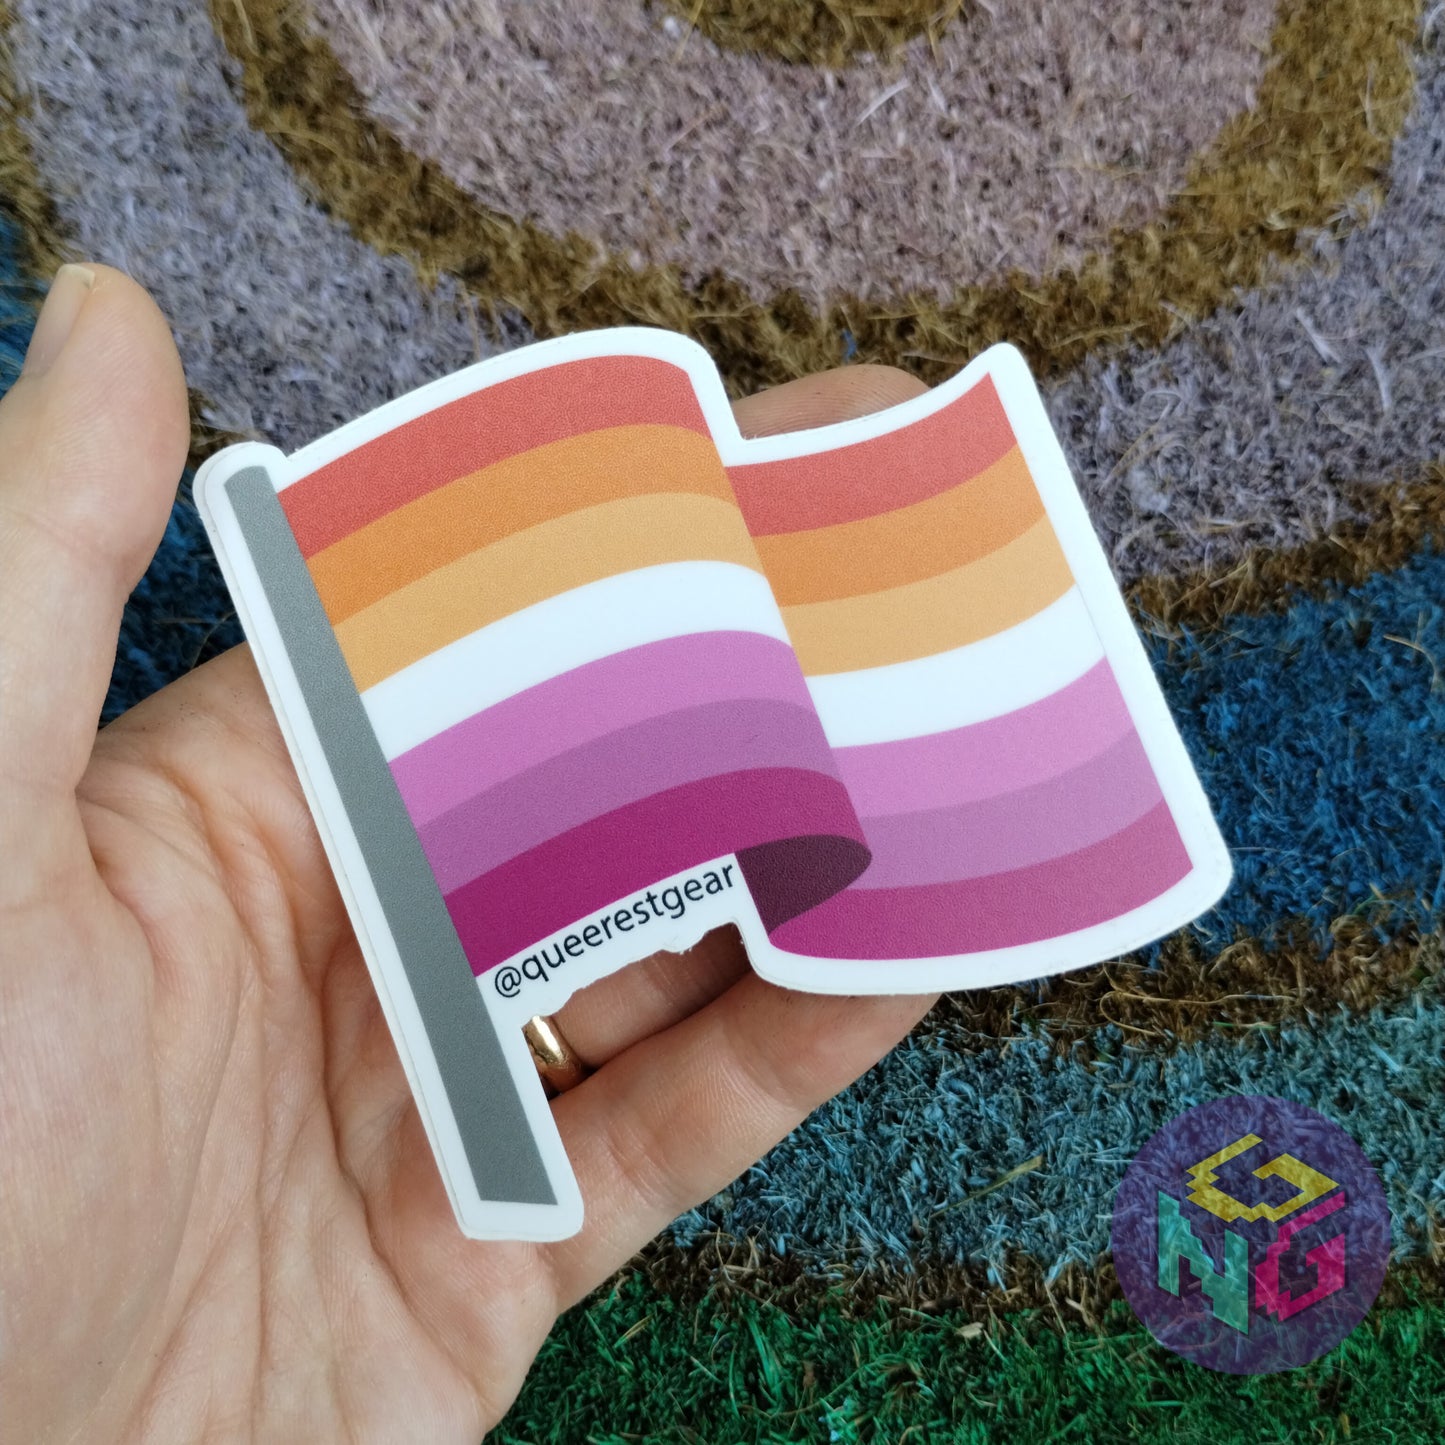 vinyl lesbian flag sticker held in a hand in front of rainbow welcome mat